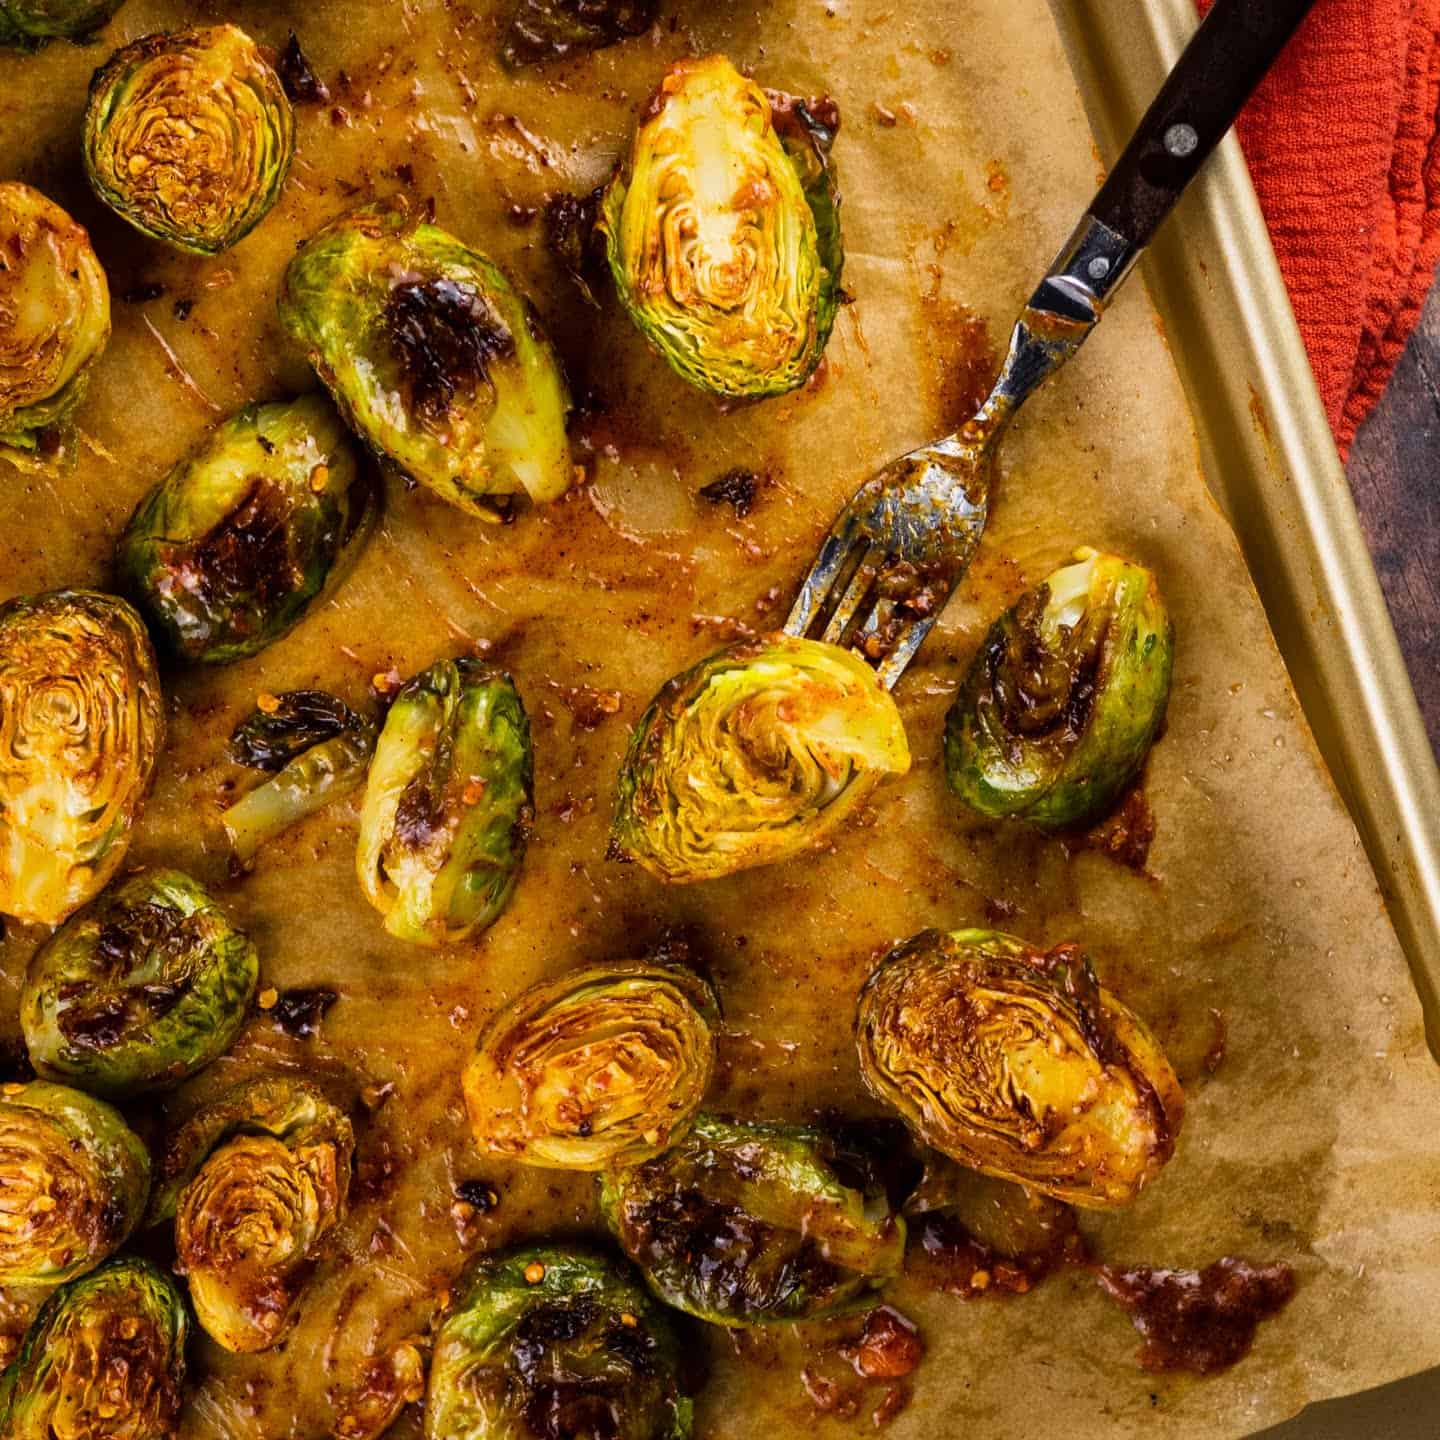 brusselt sprouts in a baking tray